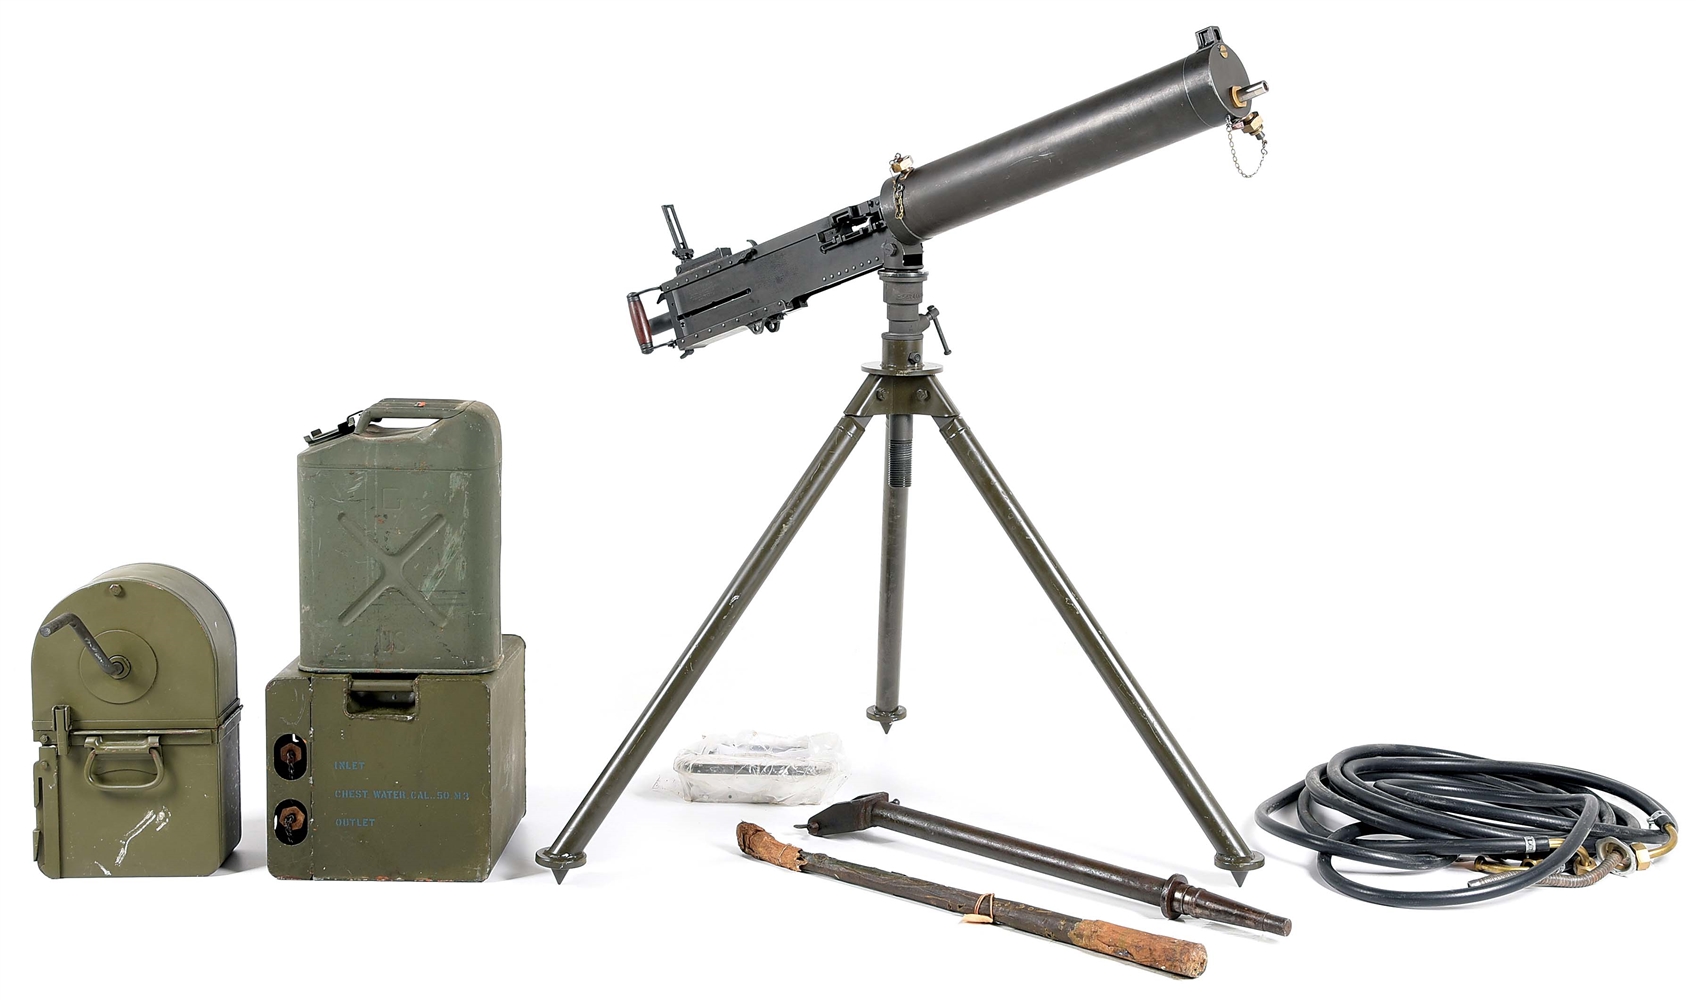 (N) BEAUTIFUL COLT MODEL 52-A BROWNING WATER COOLED .50 CALIBER MACHINE GUN WITH TRIPOD AND ACCESSORIES (CURIO AND RELIC).